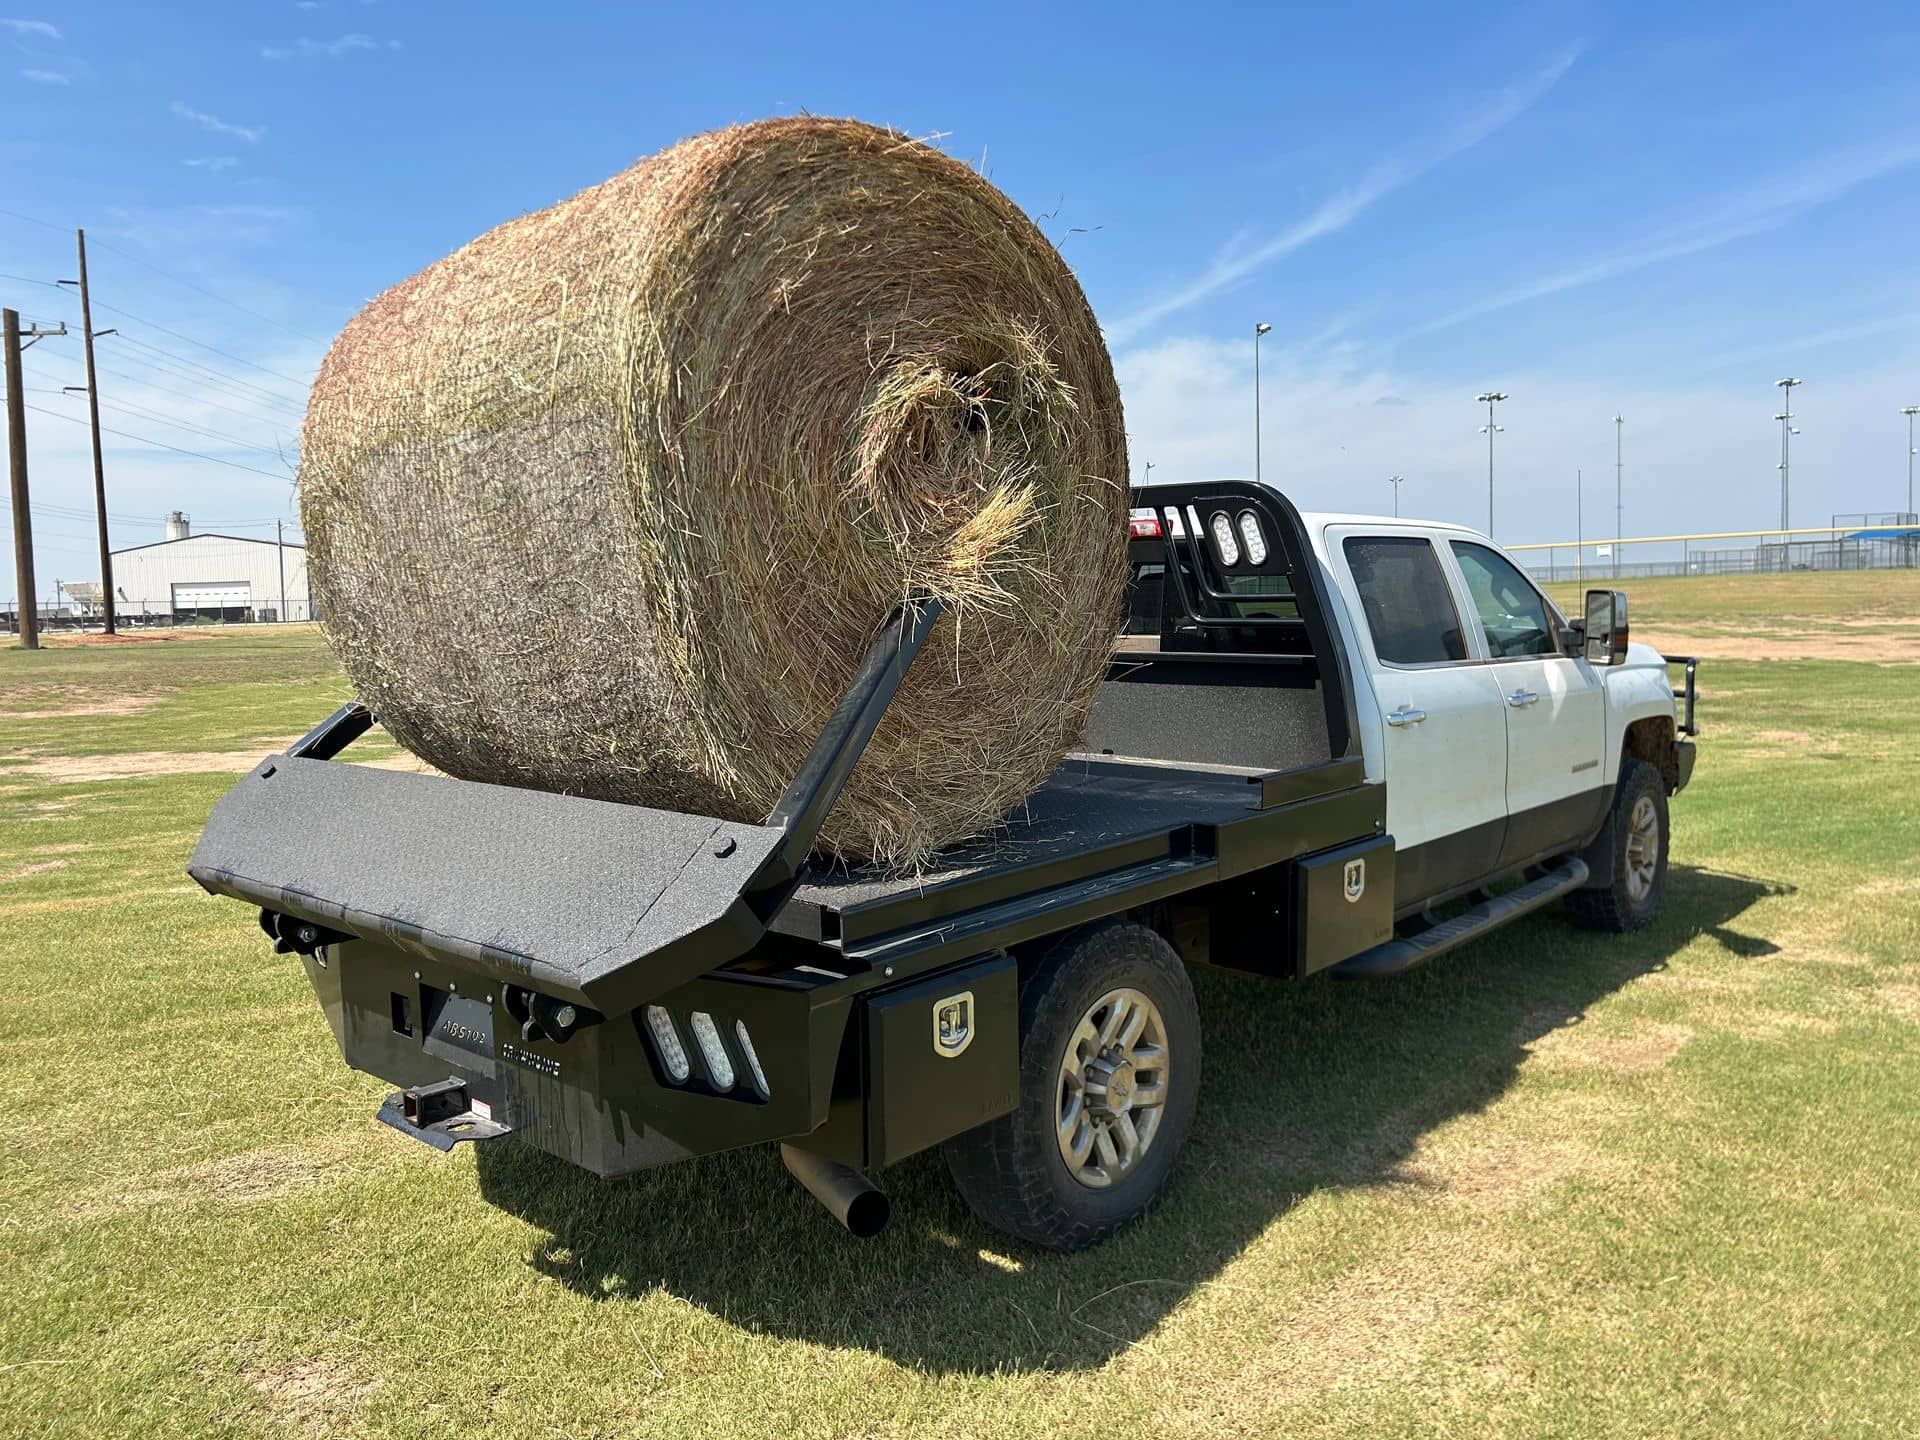 Crownline arm bed with hay bale being lifted